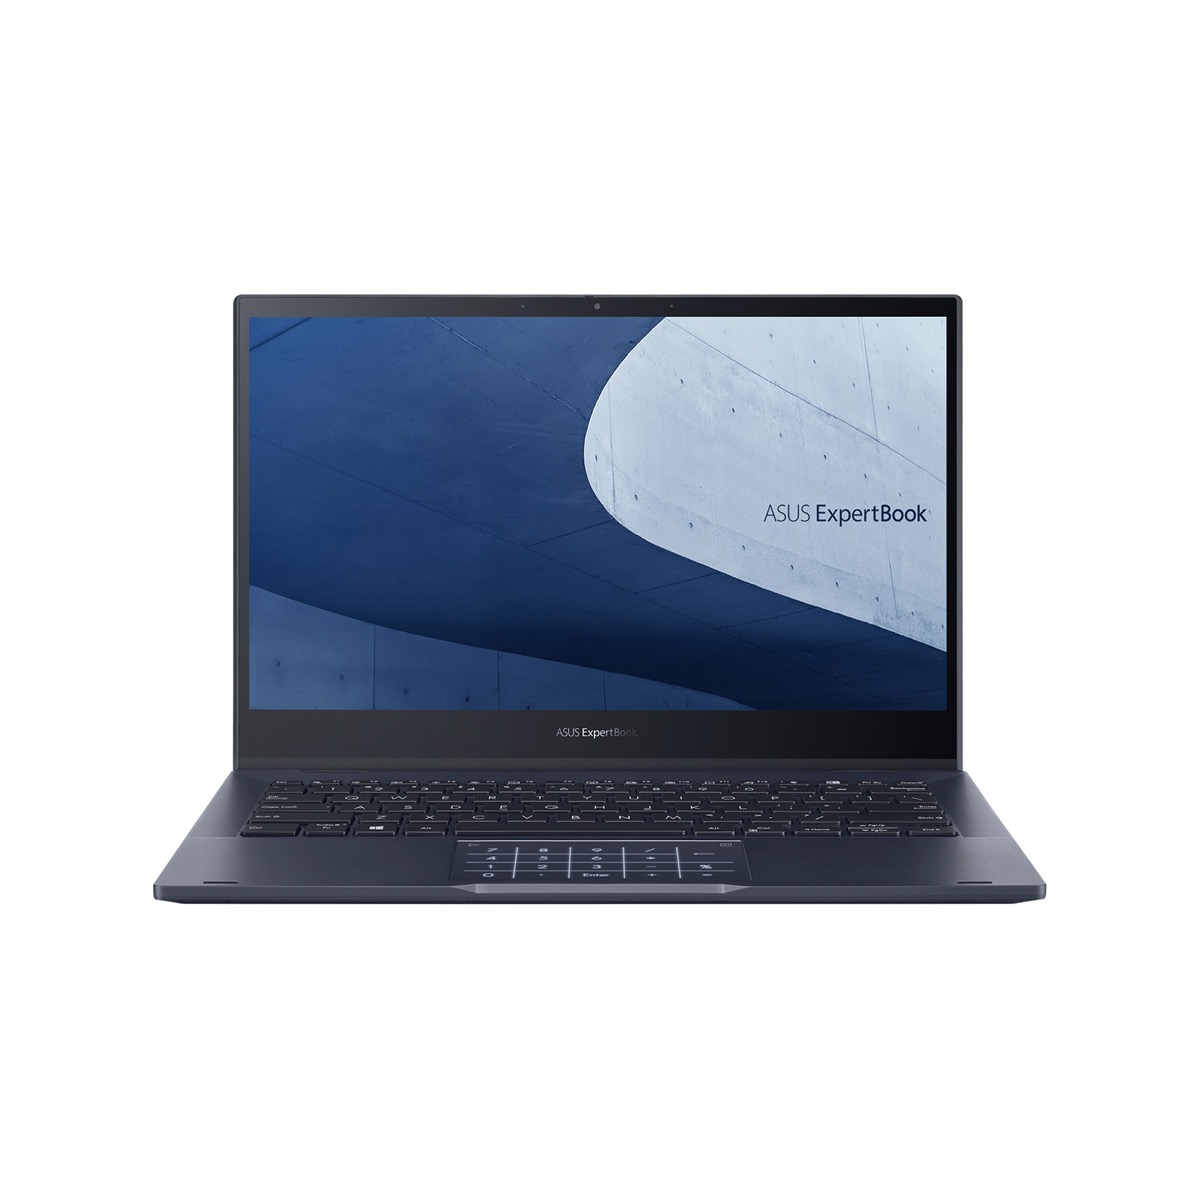 Asus-B5302CEA-I716512B0X-Asus-B5302CEA-I716512B0X-B5302CEA-I716512B0X-Laptops | LaptopSA.co.za a division of the notebook company 